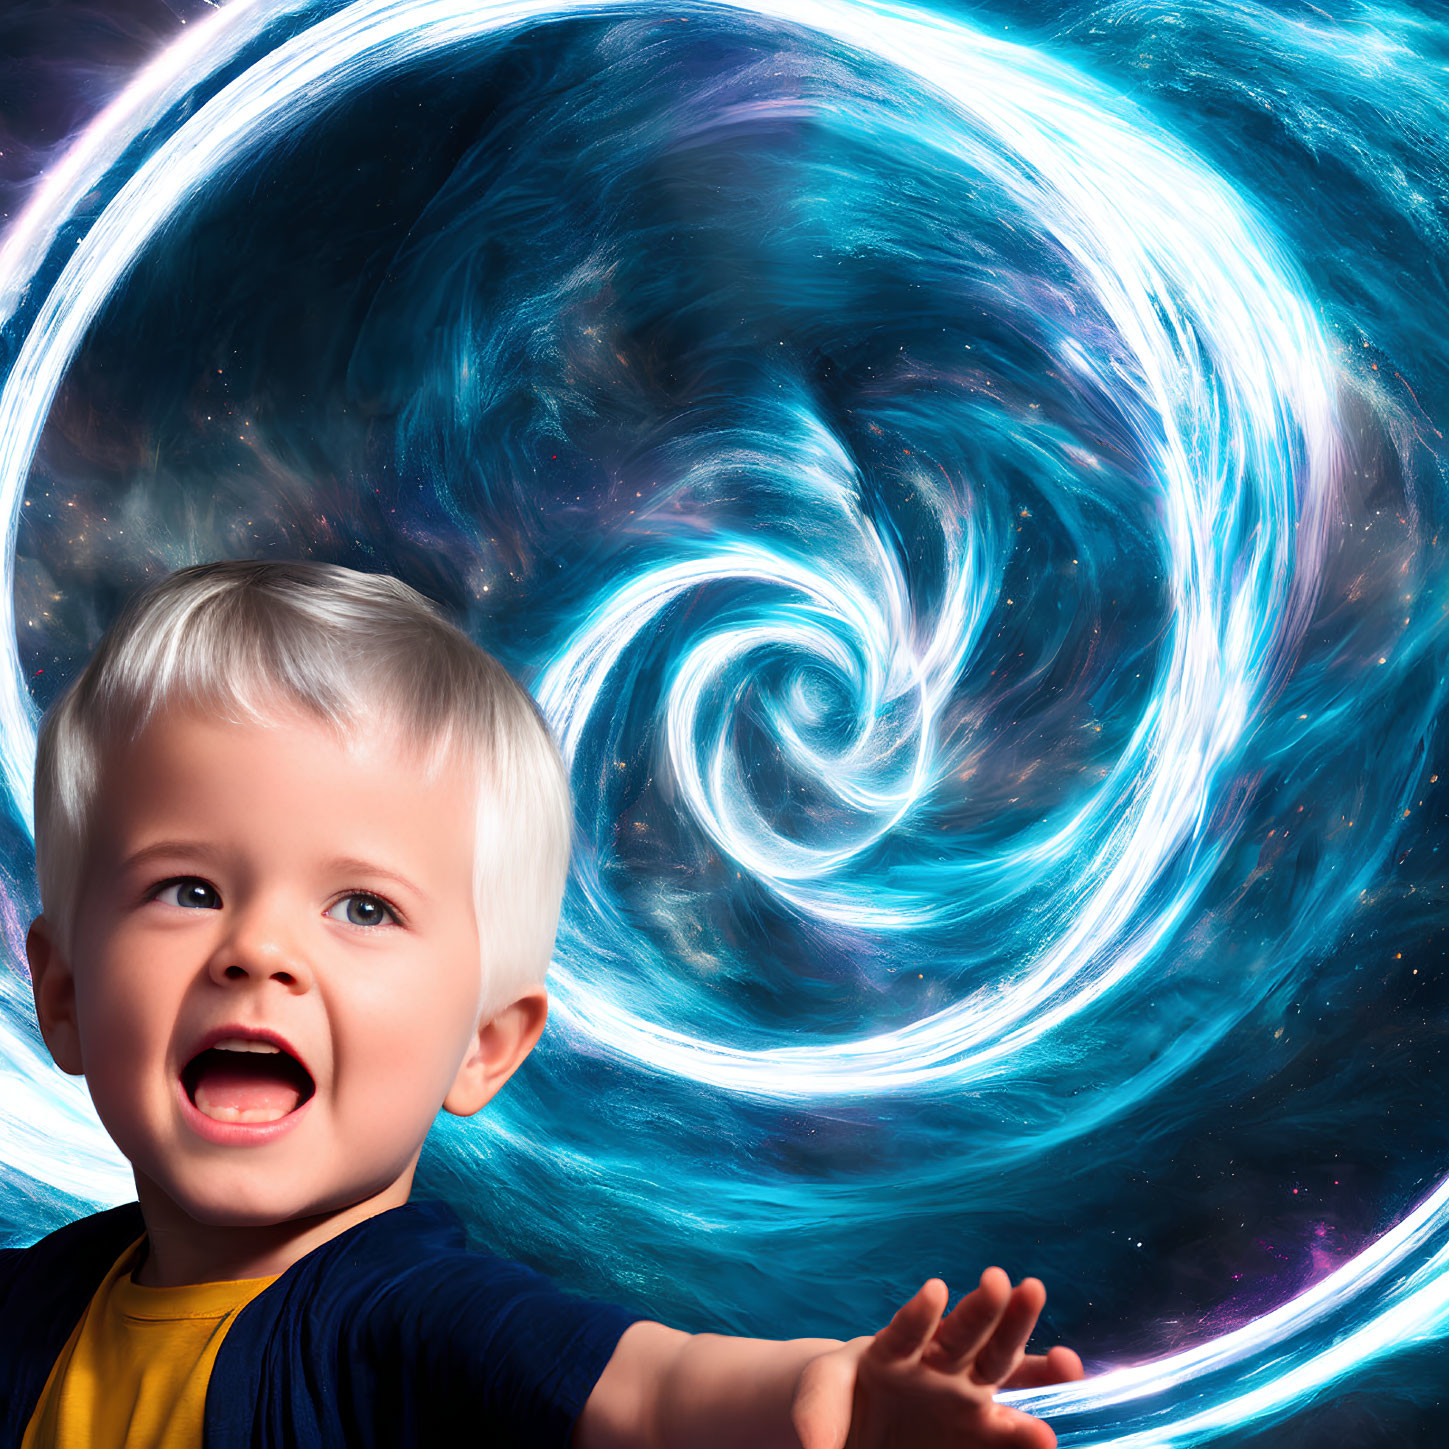 Blond-Haired Child Smiling in Cosmic Blue Background